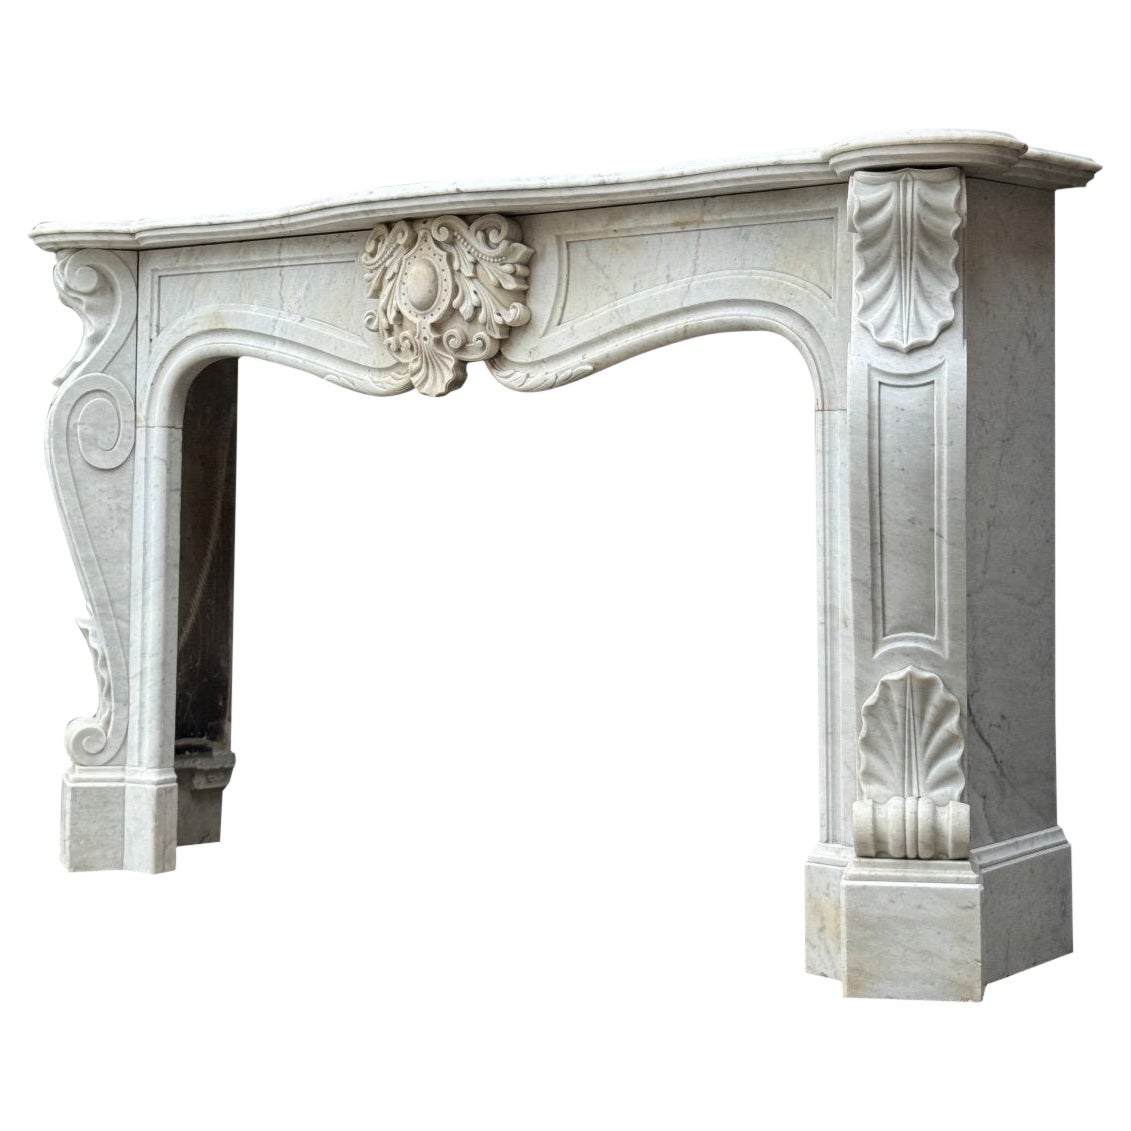 Louis XV Style Fireplace In White Carrara Marble Circa 1900 For Sale